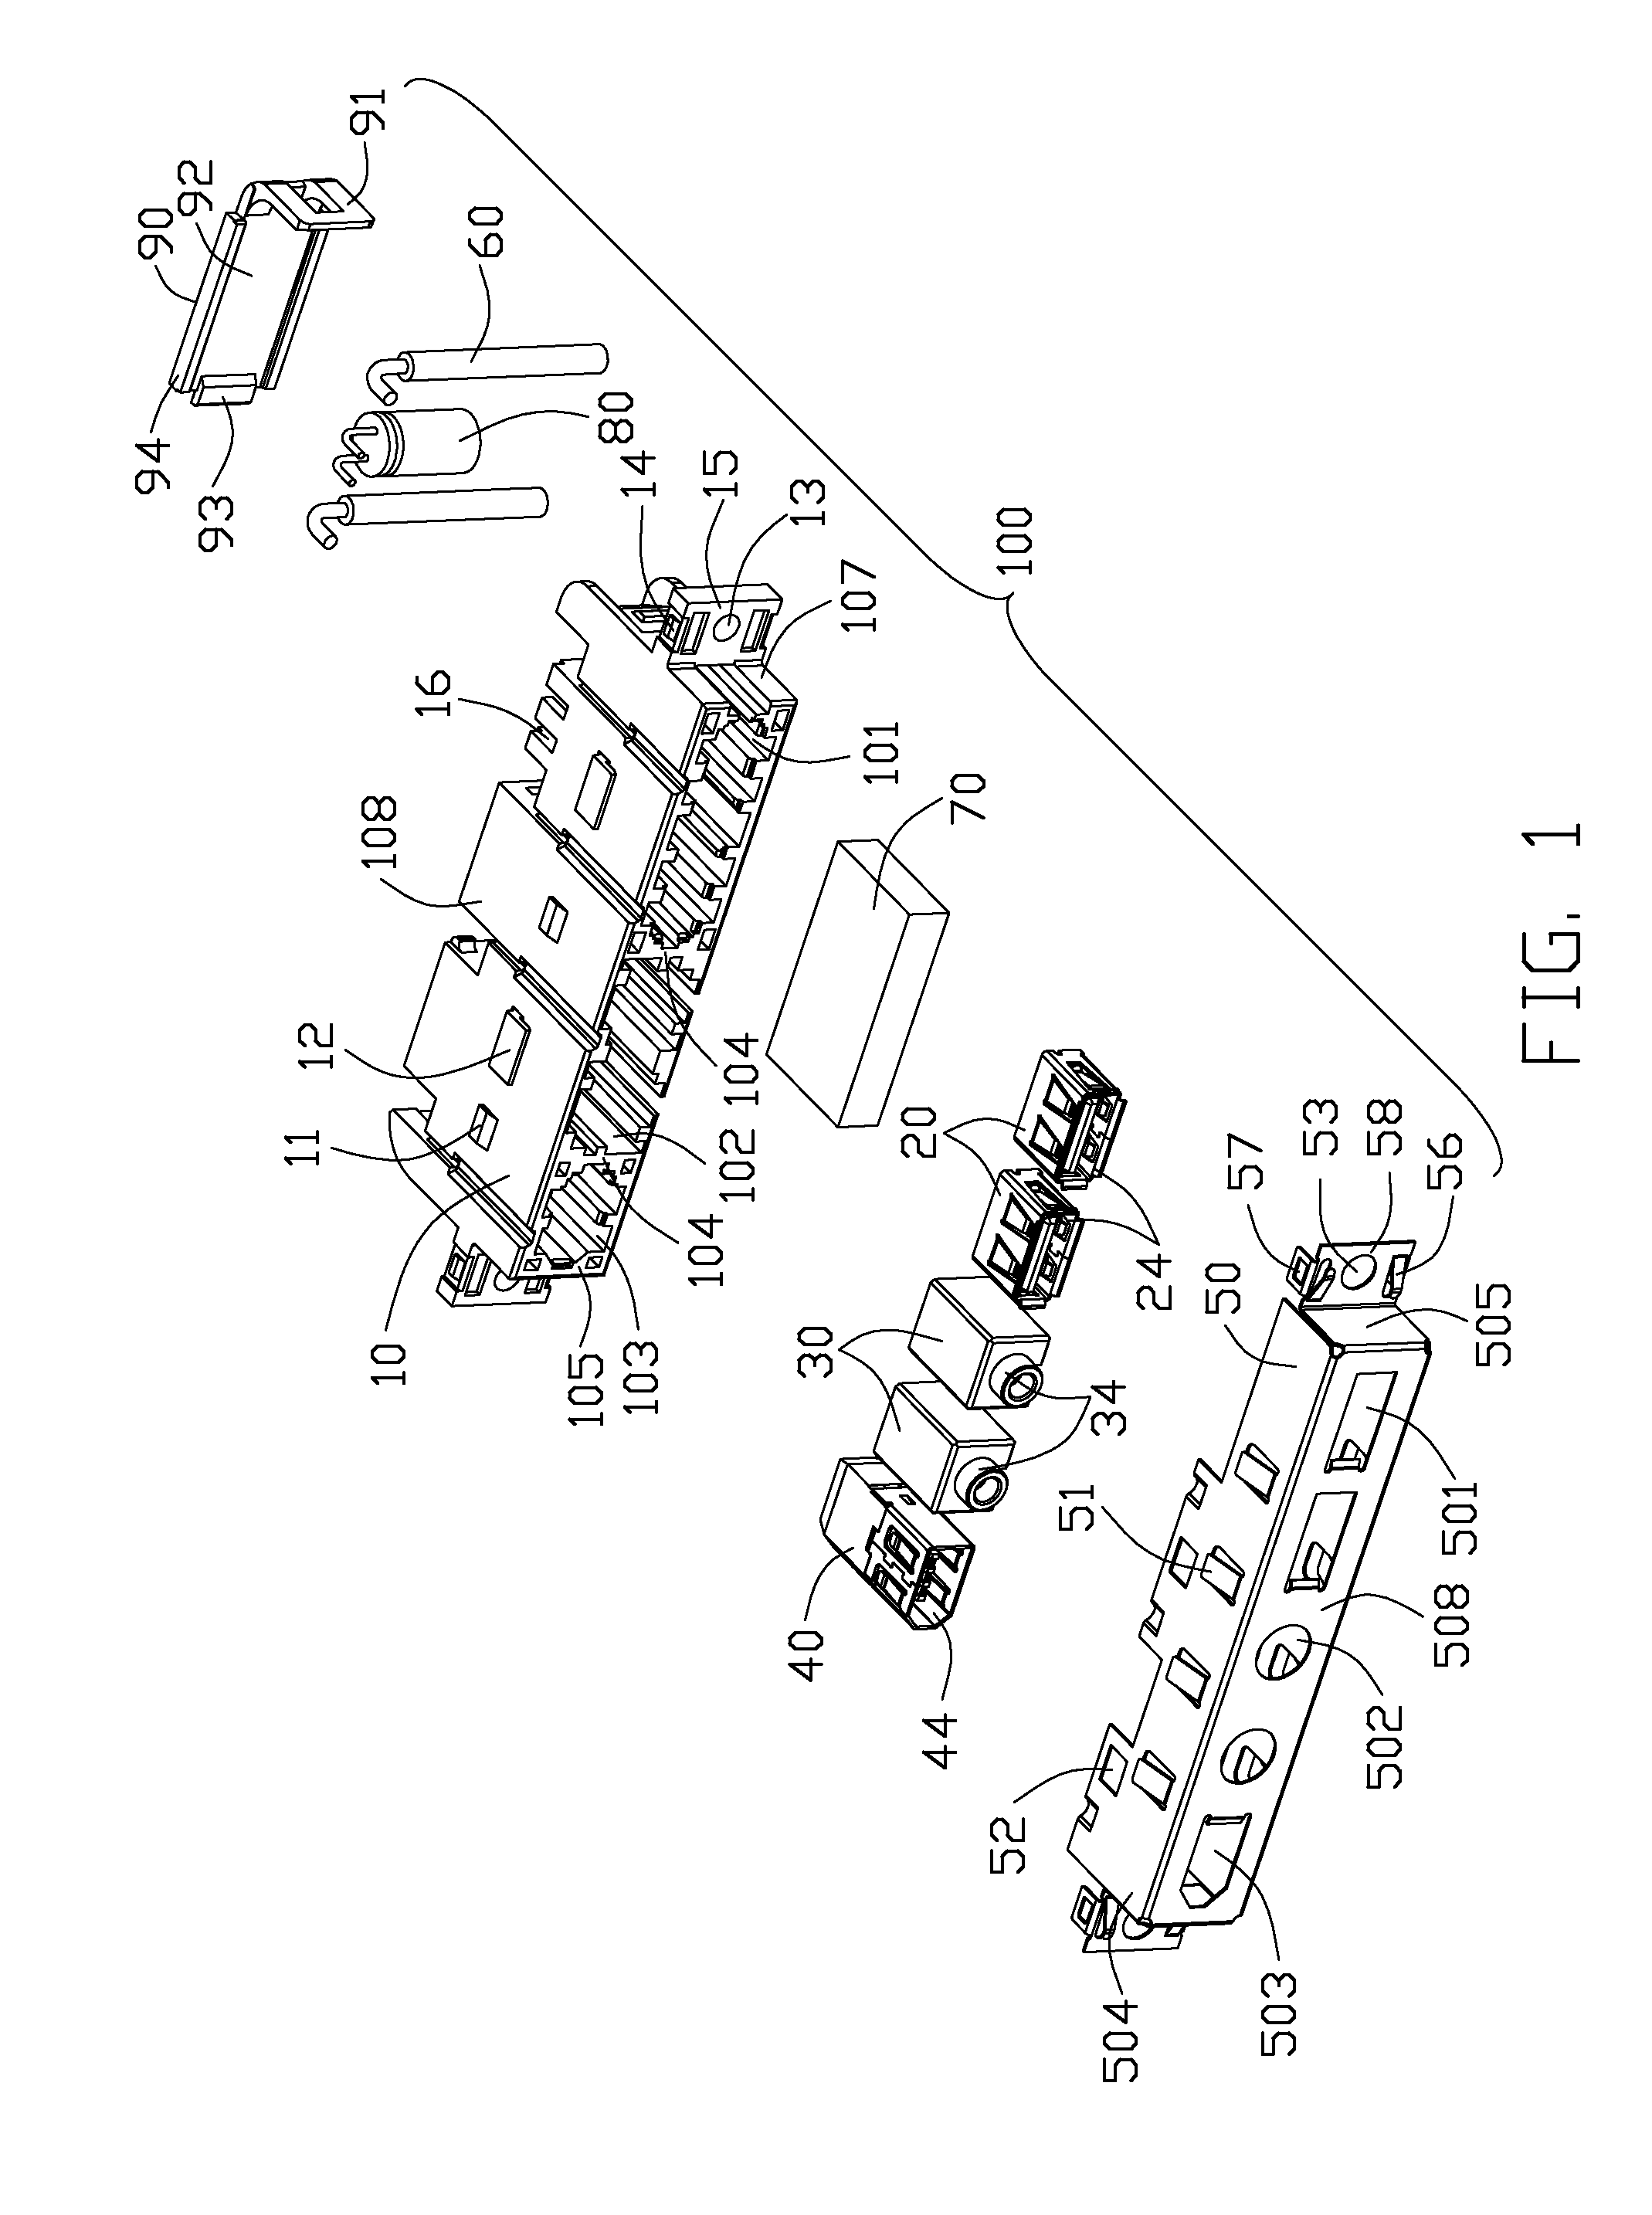 Cable connector assembly having means for limiting cables thereof from swinging